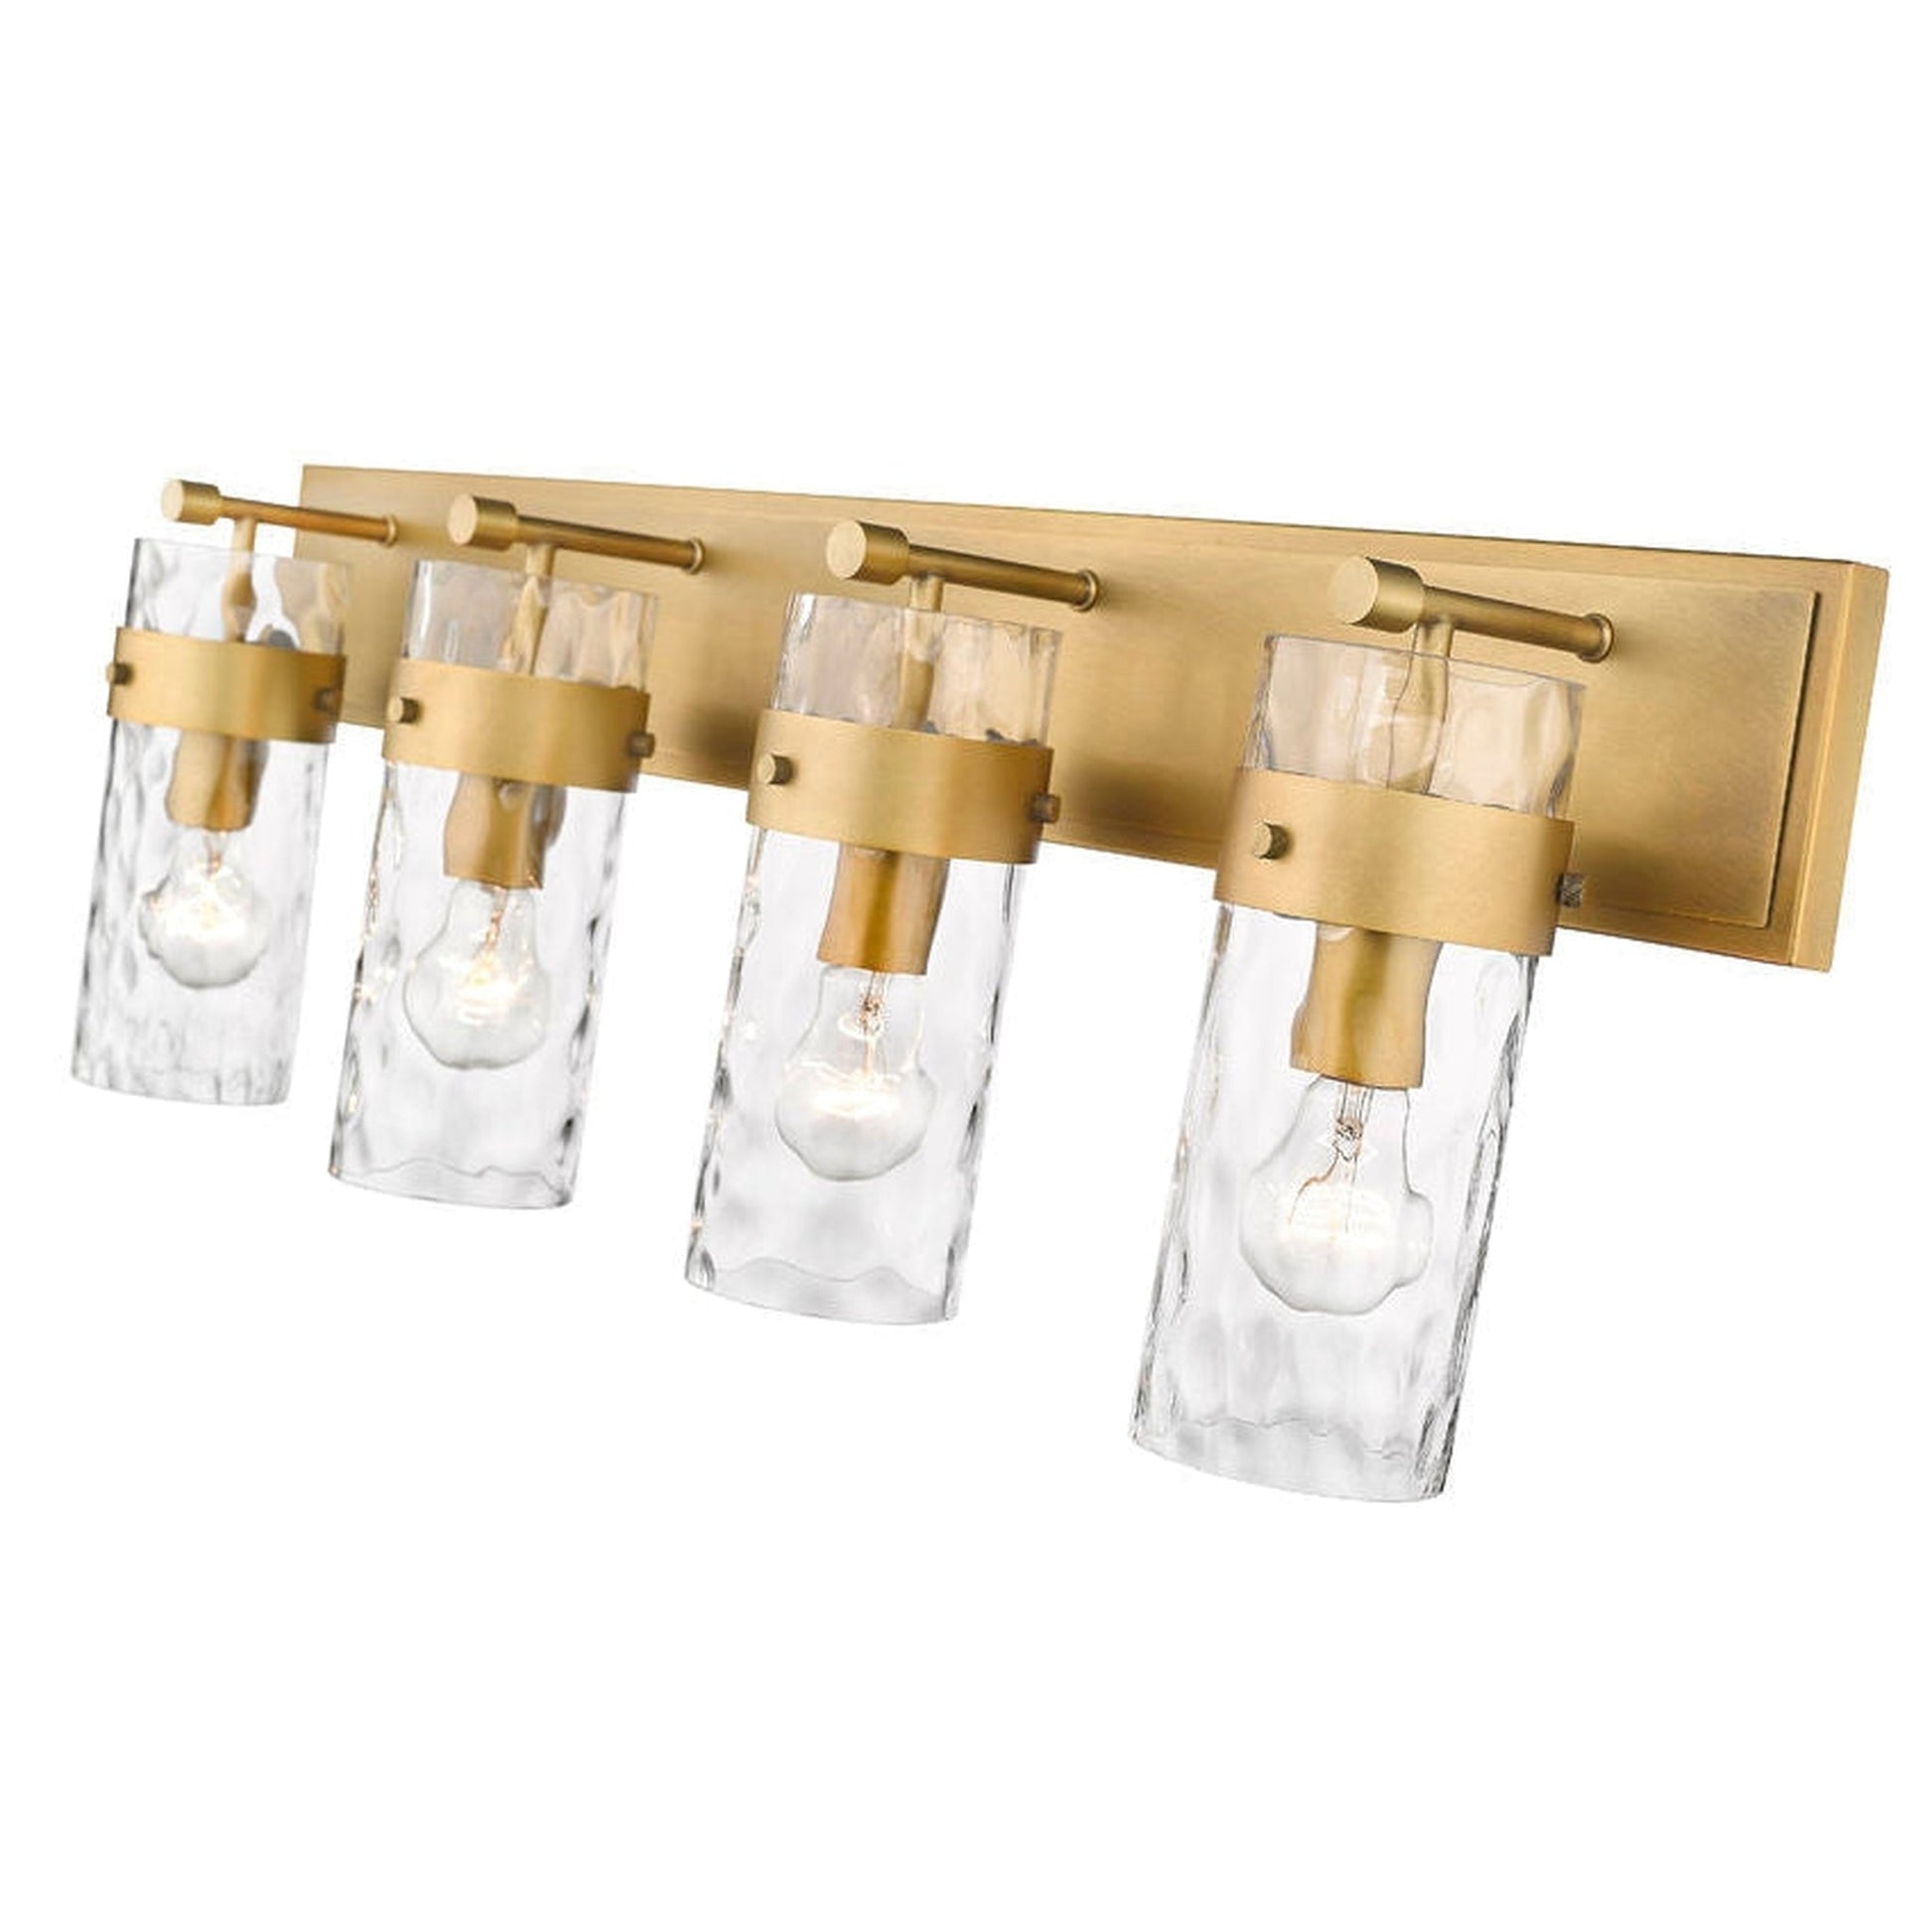 Z-Lite Fontaine 34" 4-Light Rubbed Brass Vanity Light With Clear Glass Shade